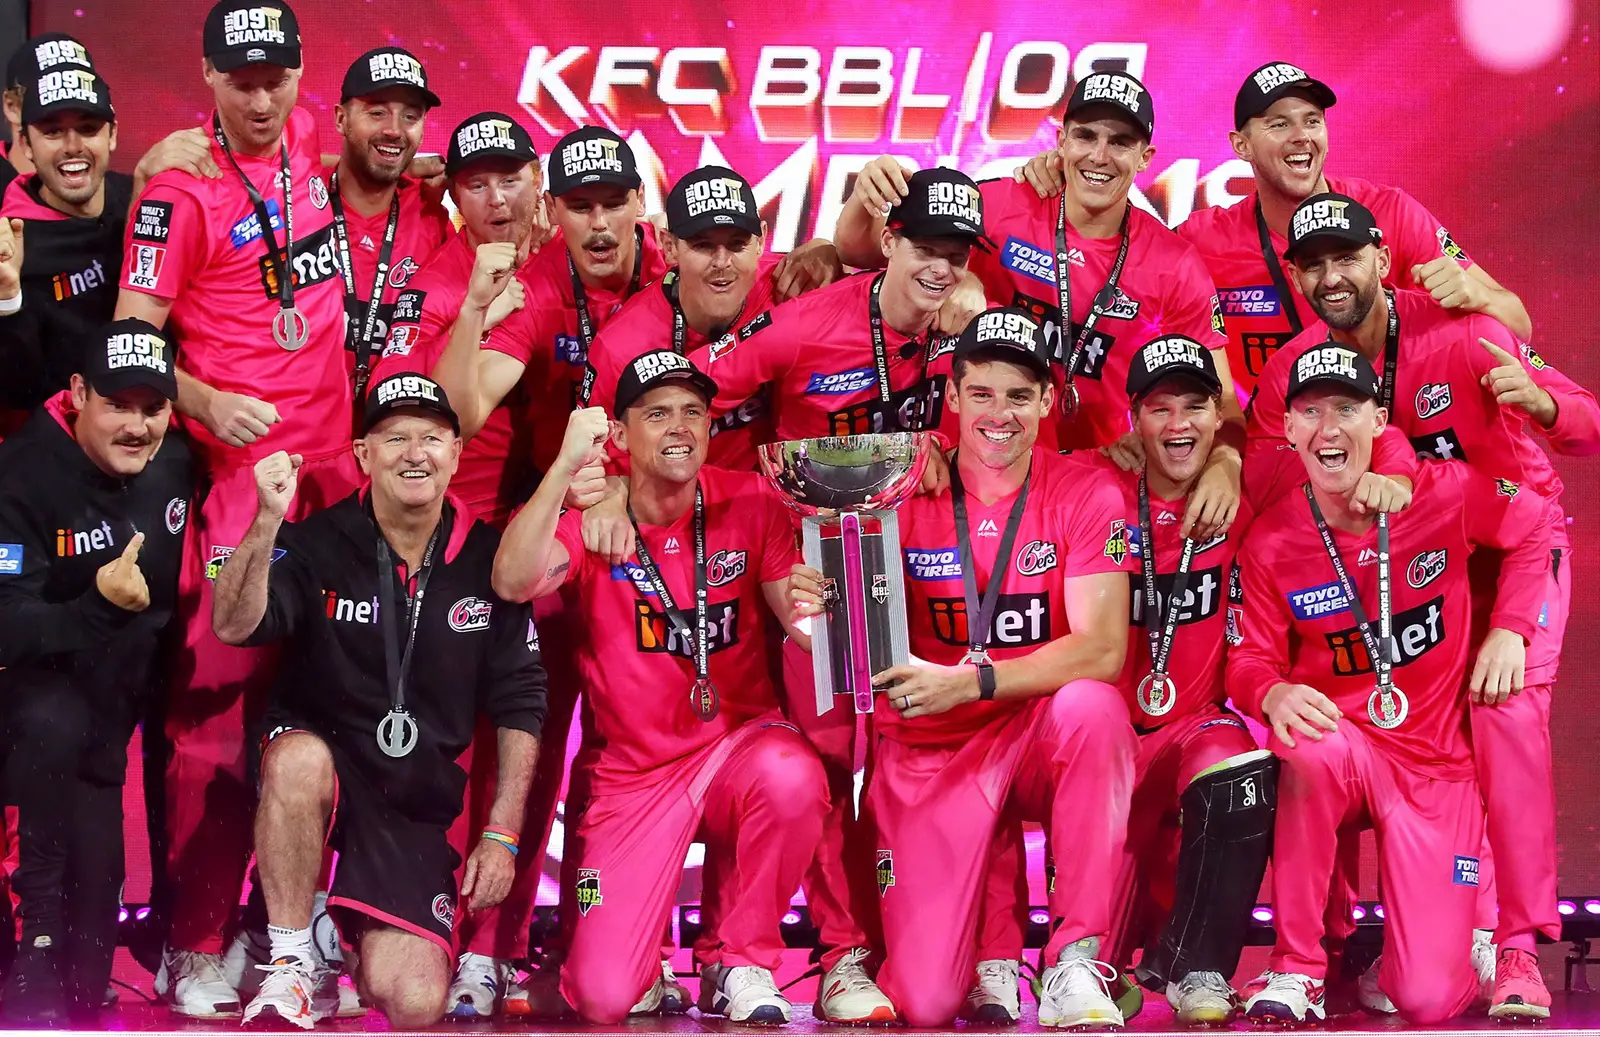 BBL 2020-21 complete schedule and squads